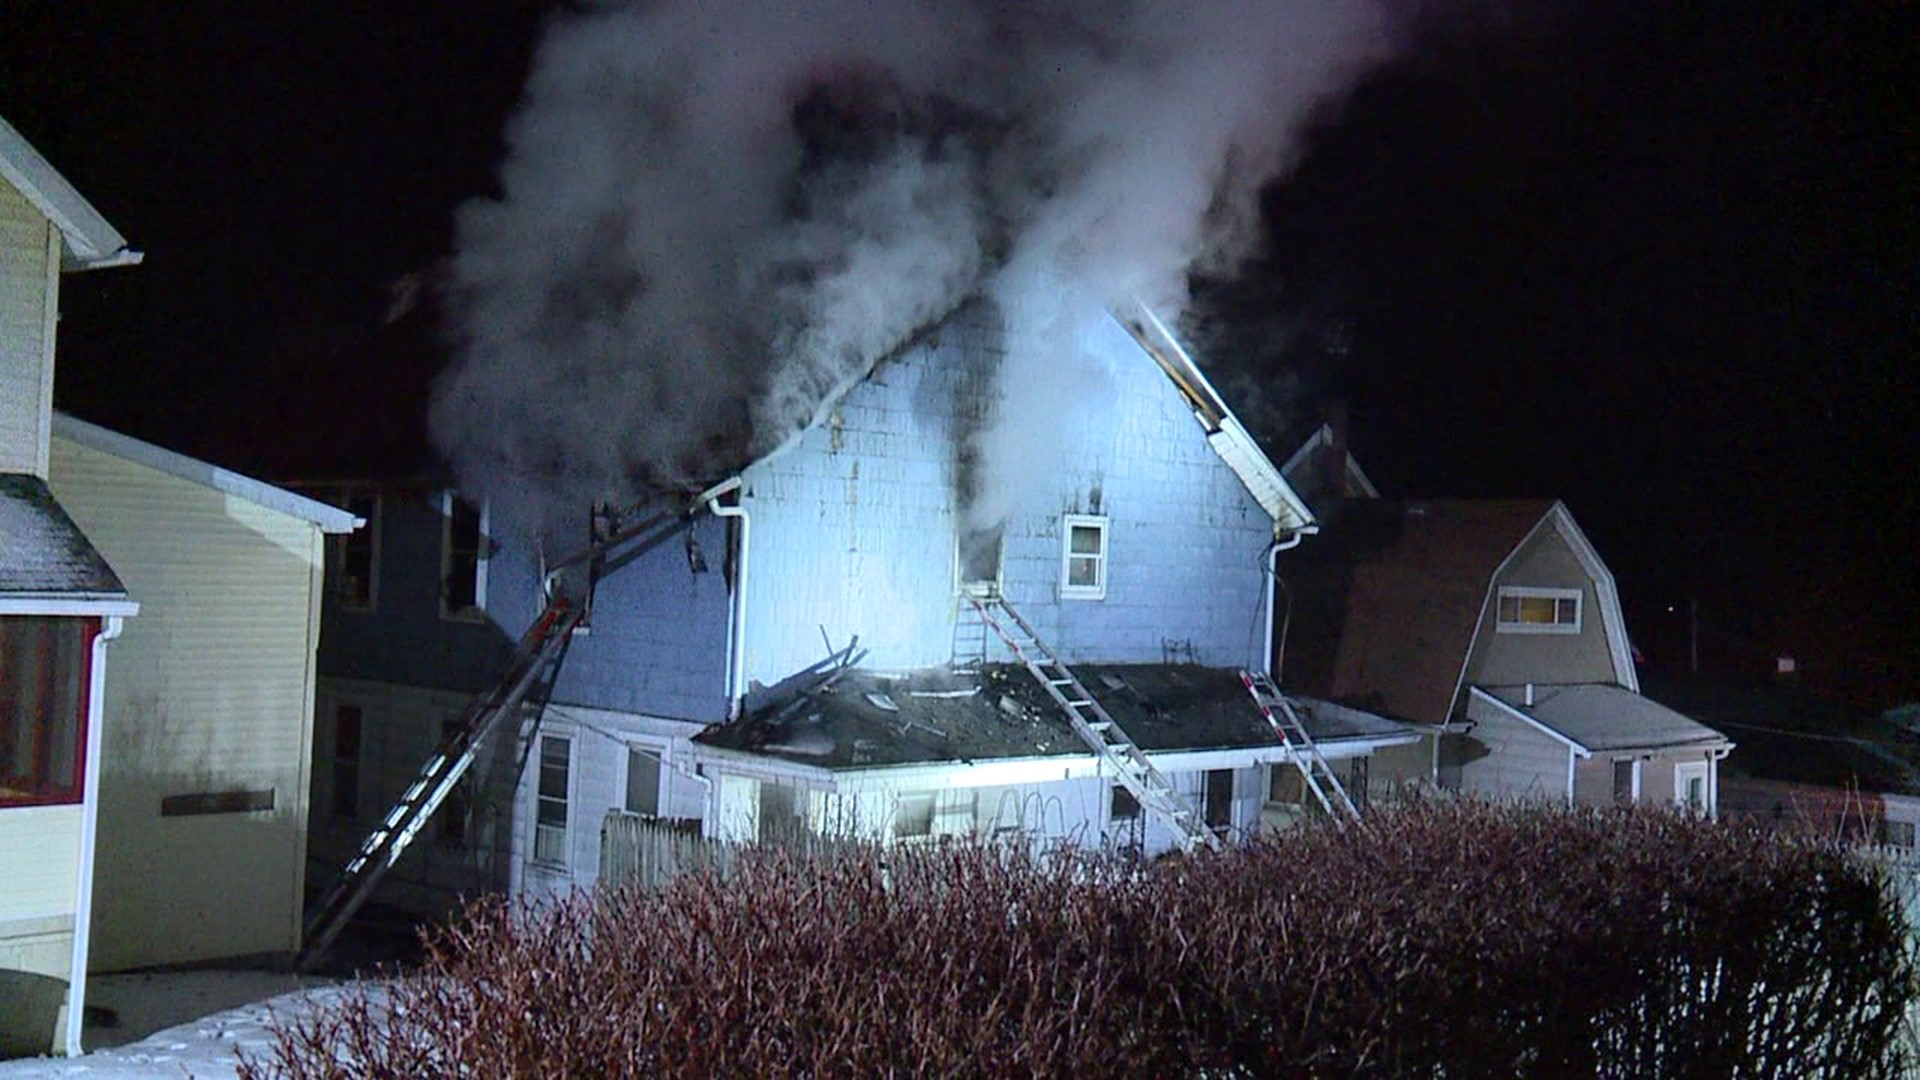 Flames broke out around 5 a.m. Sunday morning along Chestnut Street in Hanover Township.